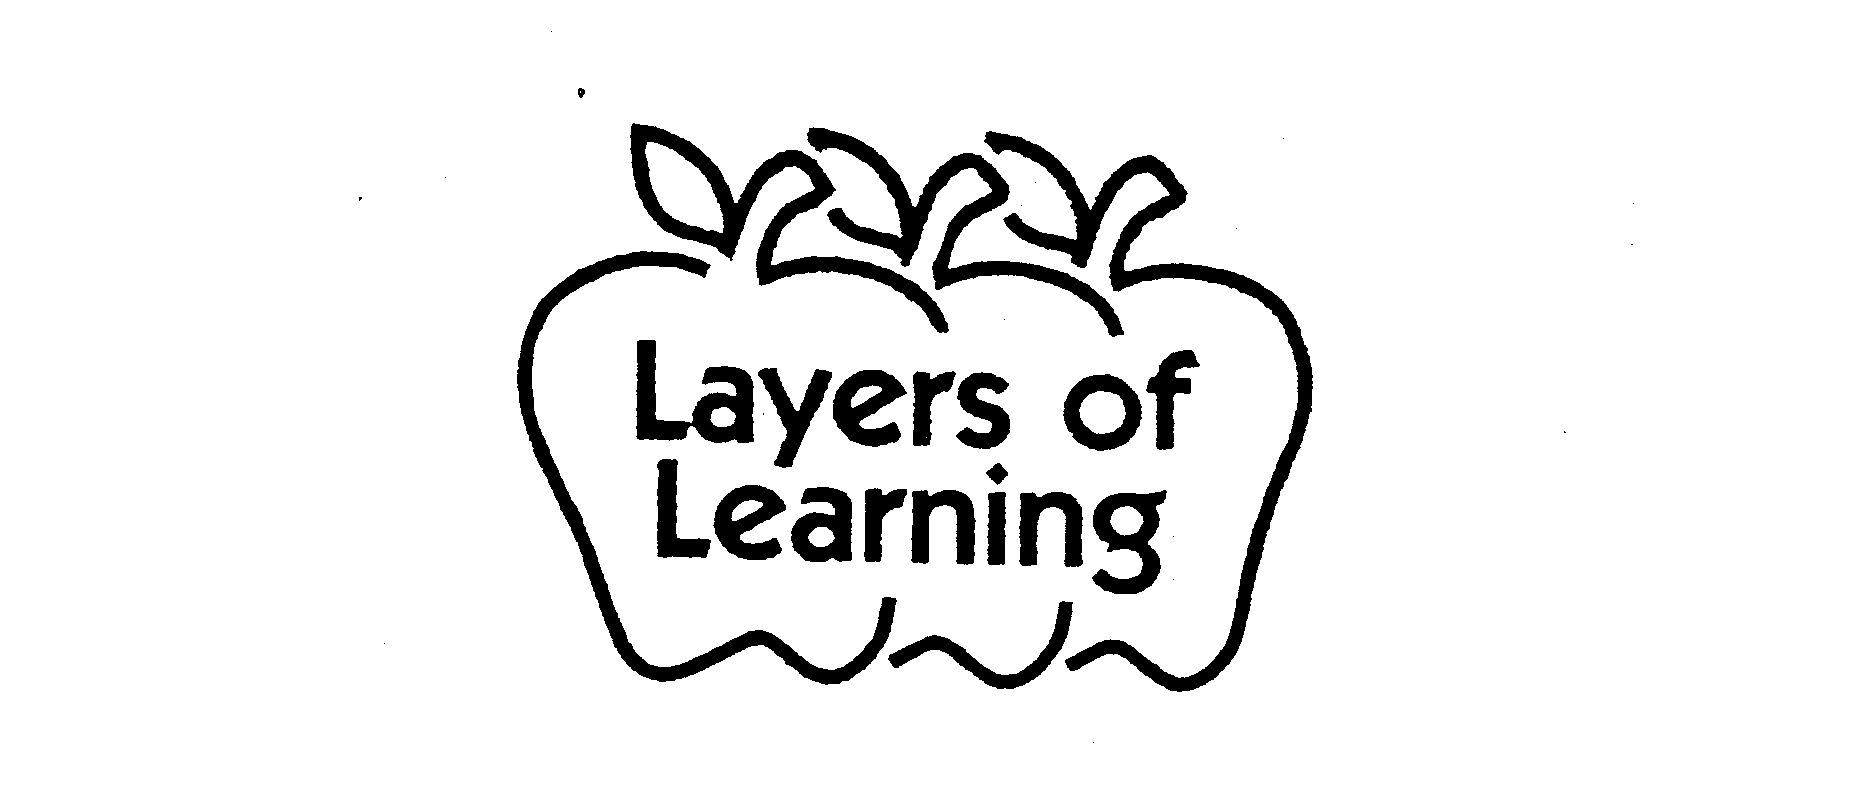 LAYERS OF LEARNING